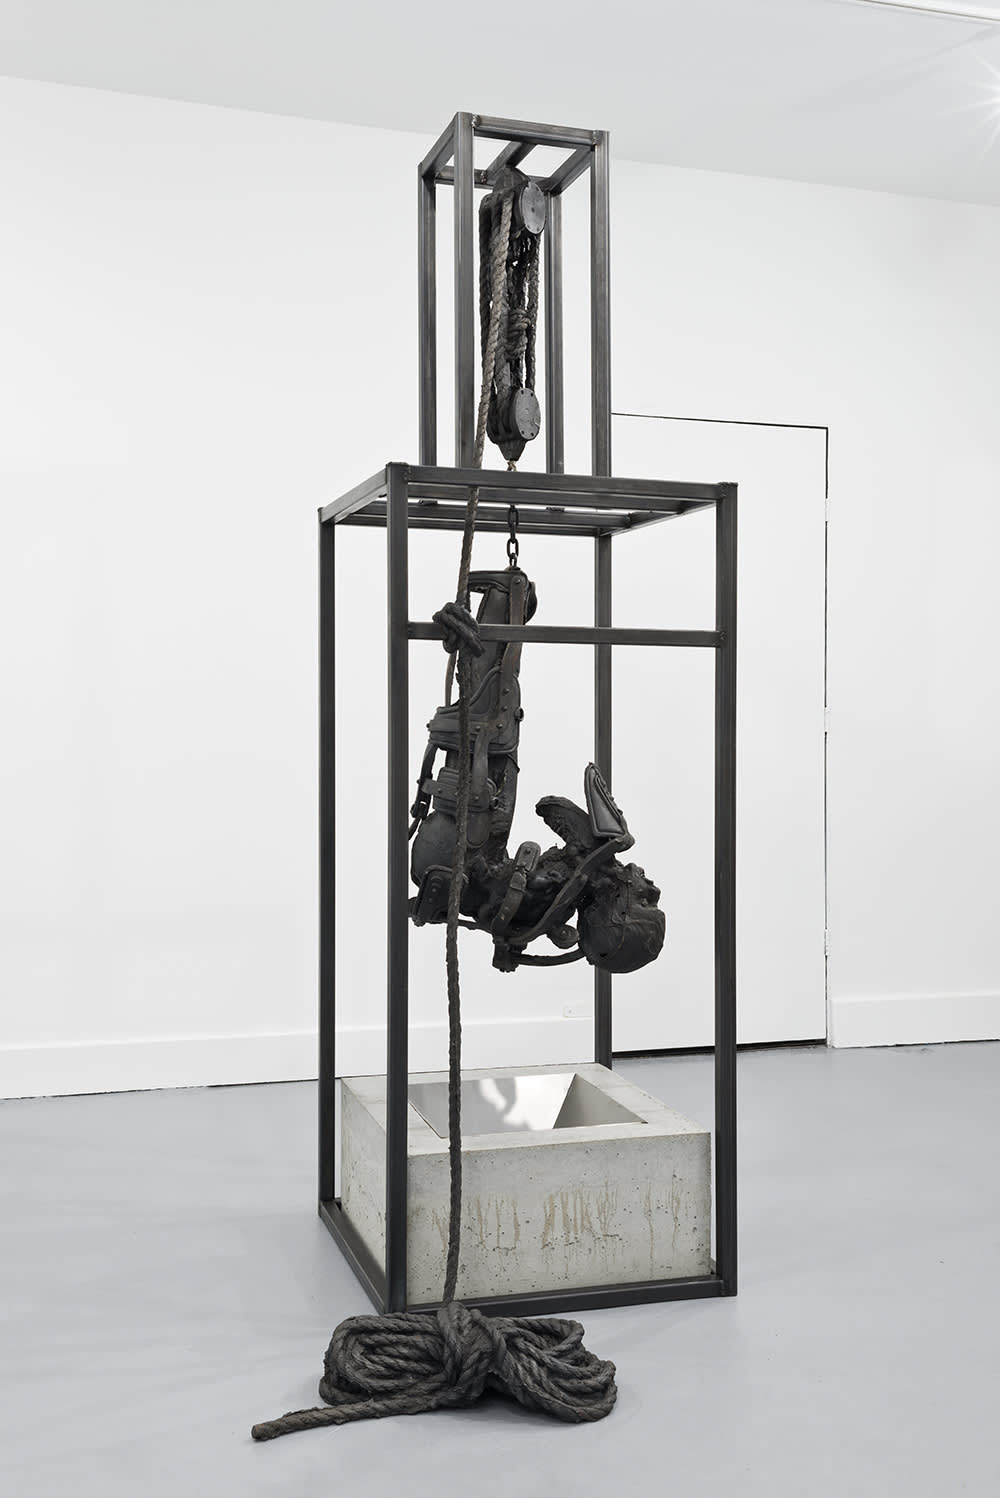 Installation view of a metal sculpture of a vertical tower, with a sculptures made of cast iron depicting a a figure in agony suspended inside of the tower by with cast iron ropes. There is a concrete and metal trapezoid at the base of the sculpture. 